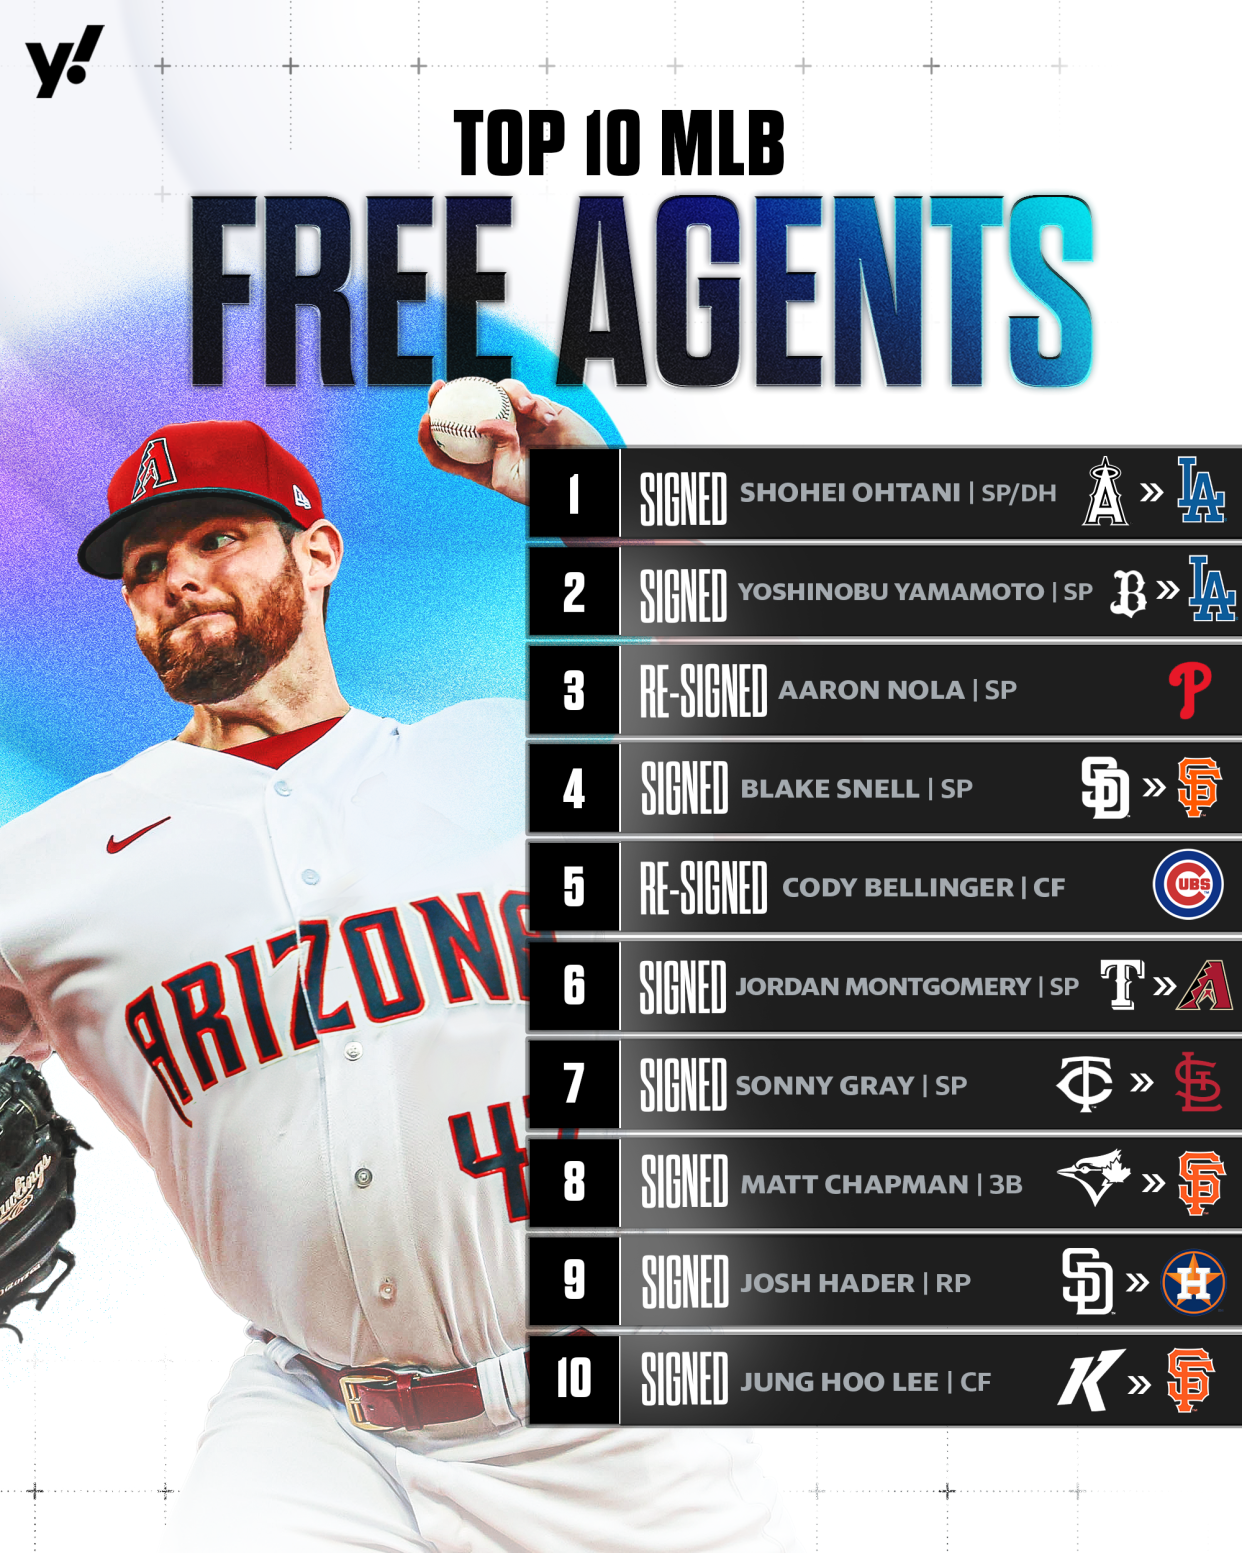 MLB's top 10 free agents have finally signed.